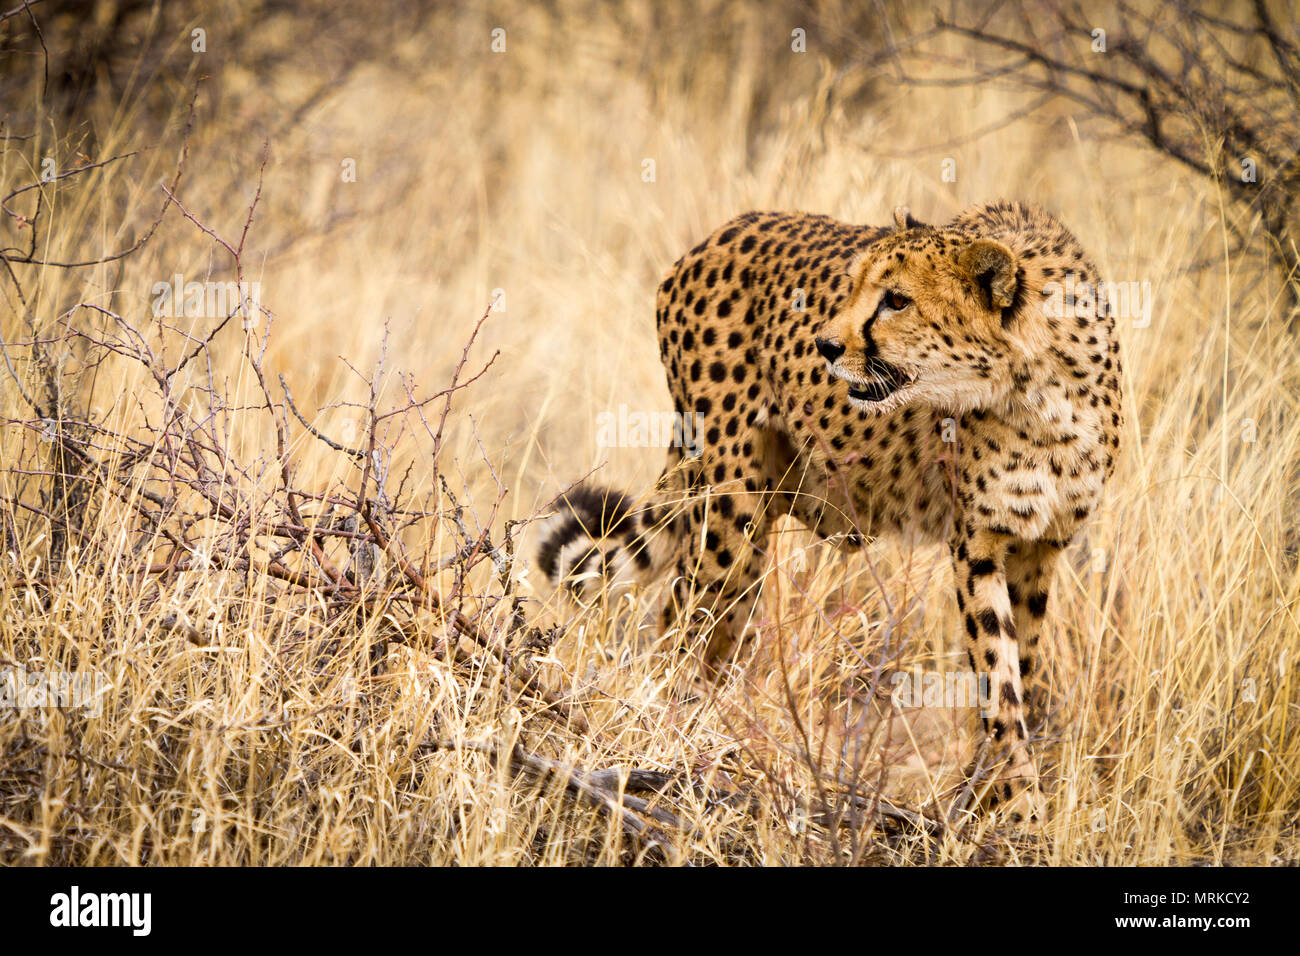 Cheetah standing in grass looking away from camera Stock Photo